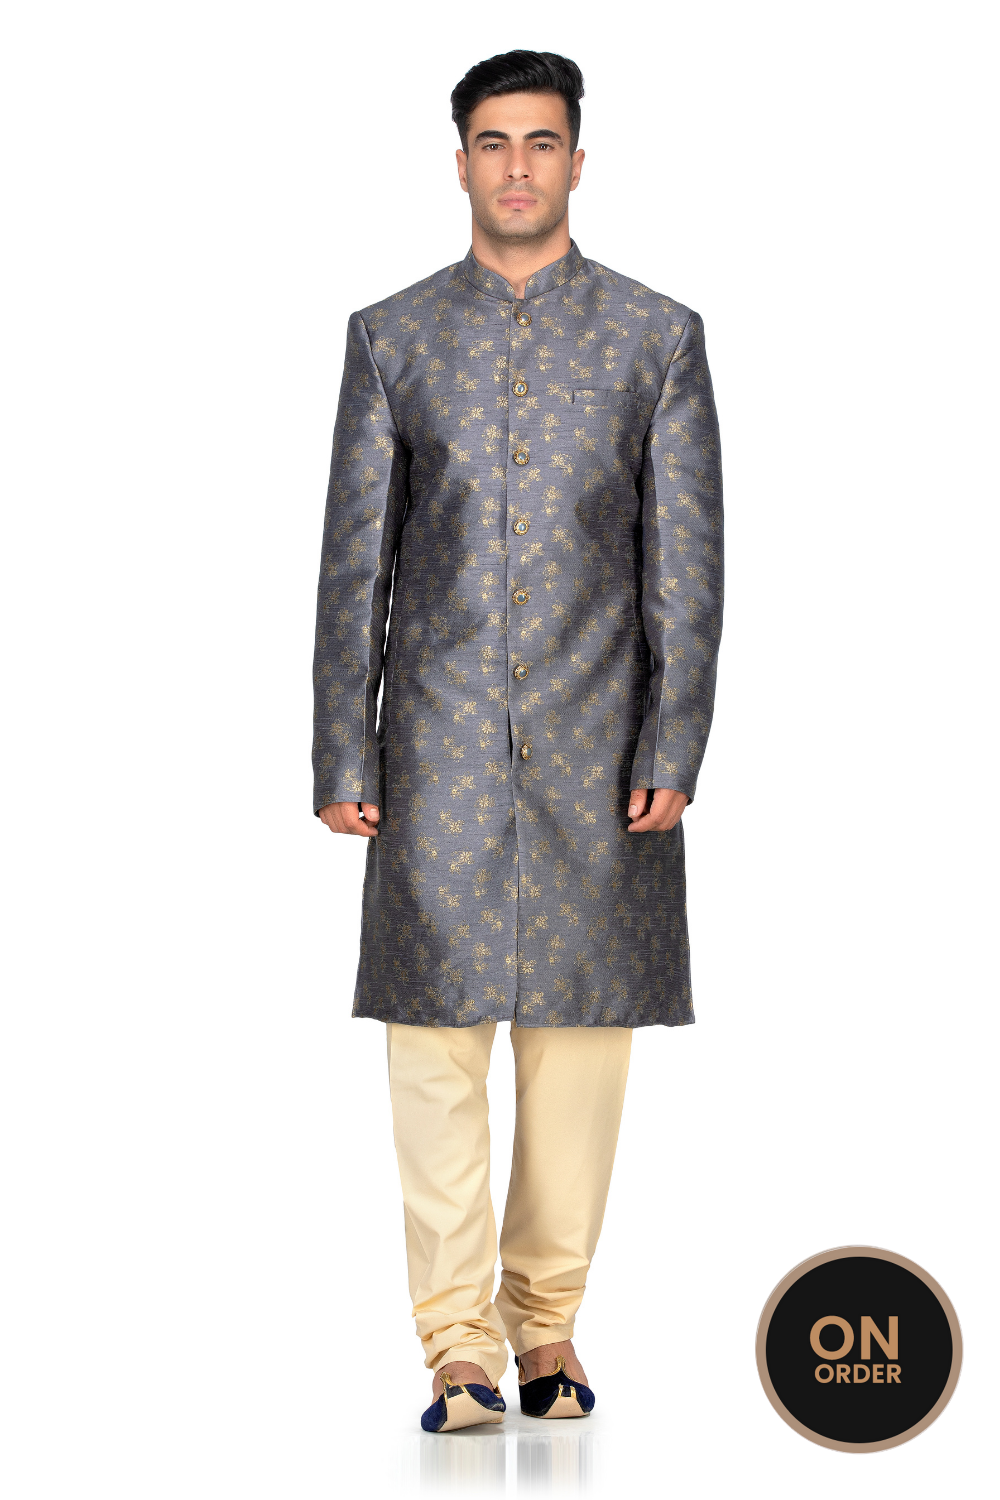 TREND GREY JACQUARD INDO WESTERN WITH GOLD FLOWER PRINT